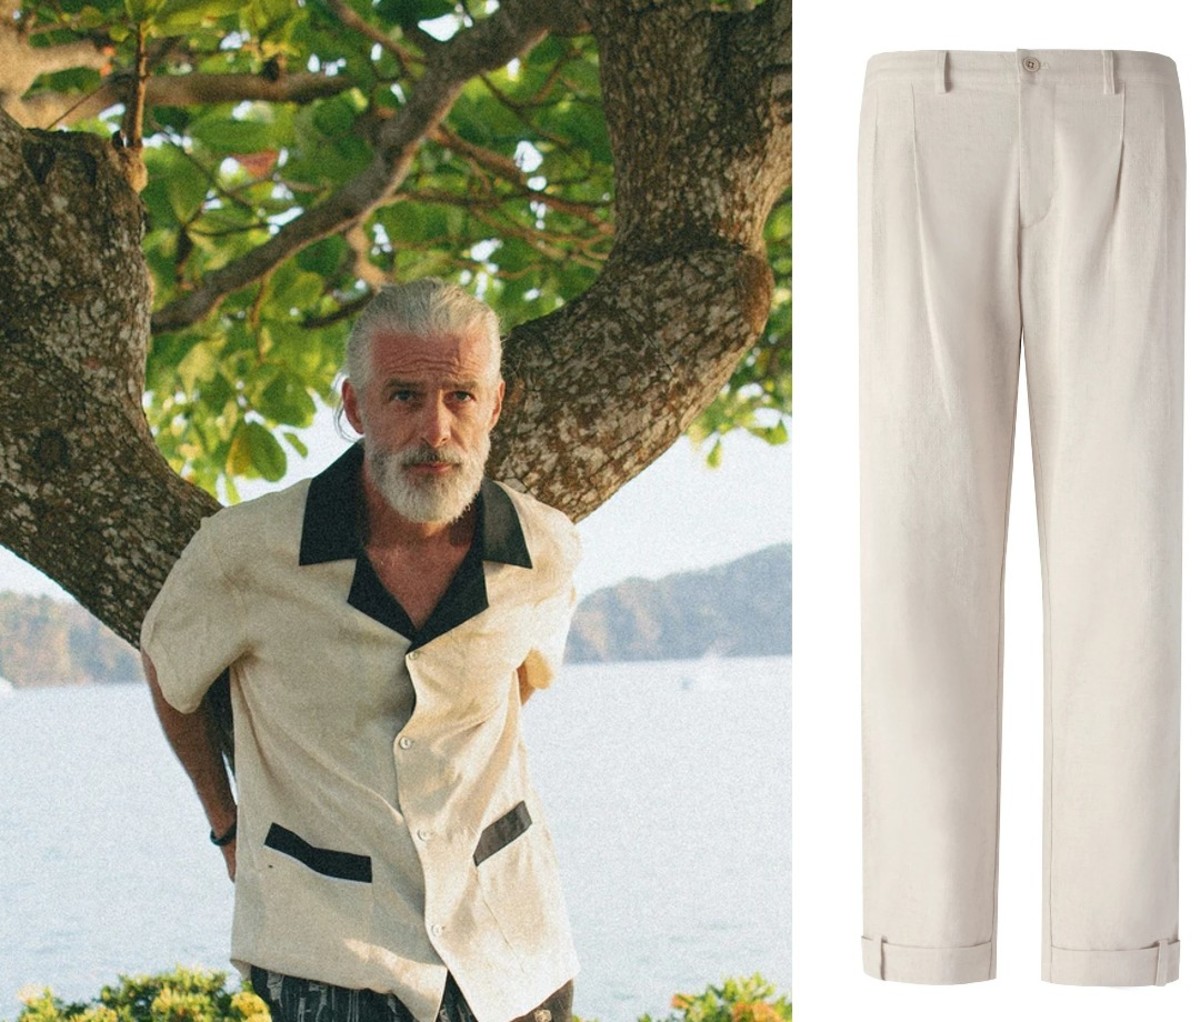 Tombolo 'Black Tie Optional' Cabana (Champagne) and Traveler Pants (Natural Linen)